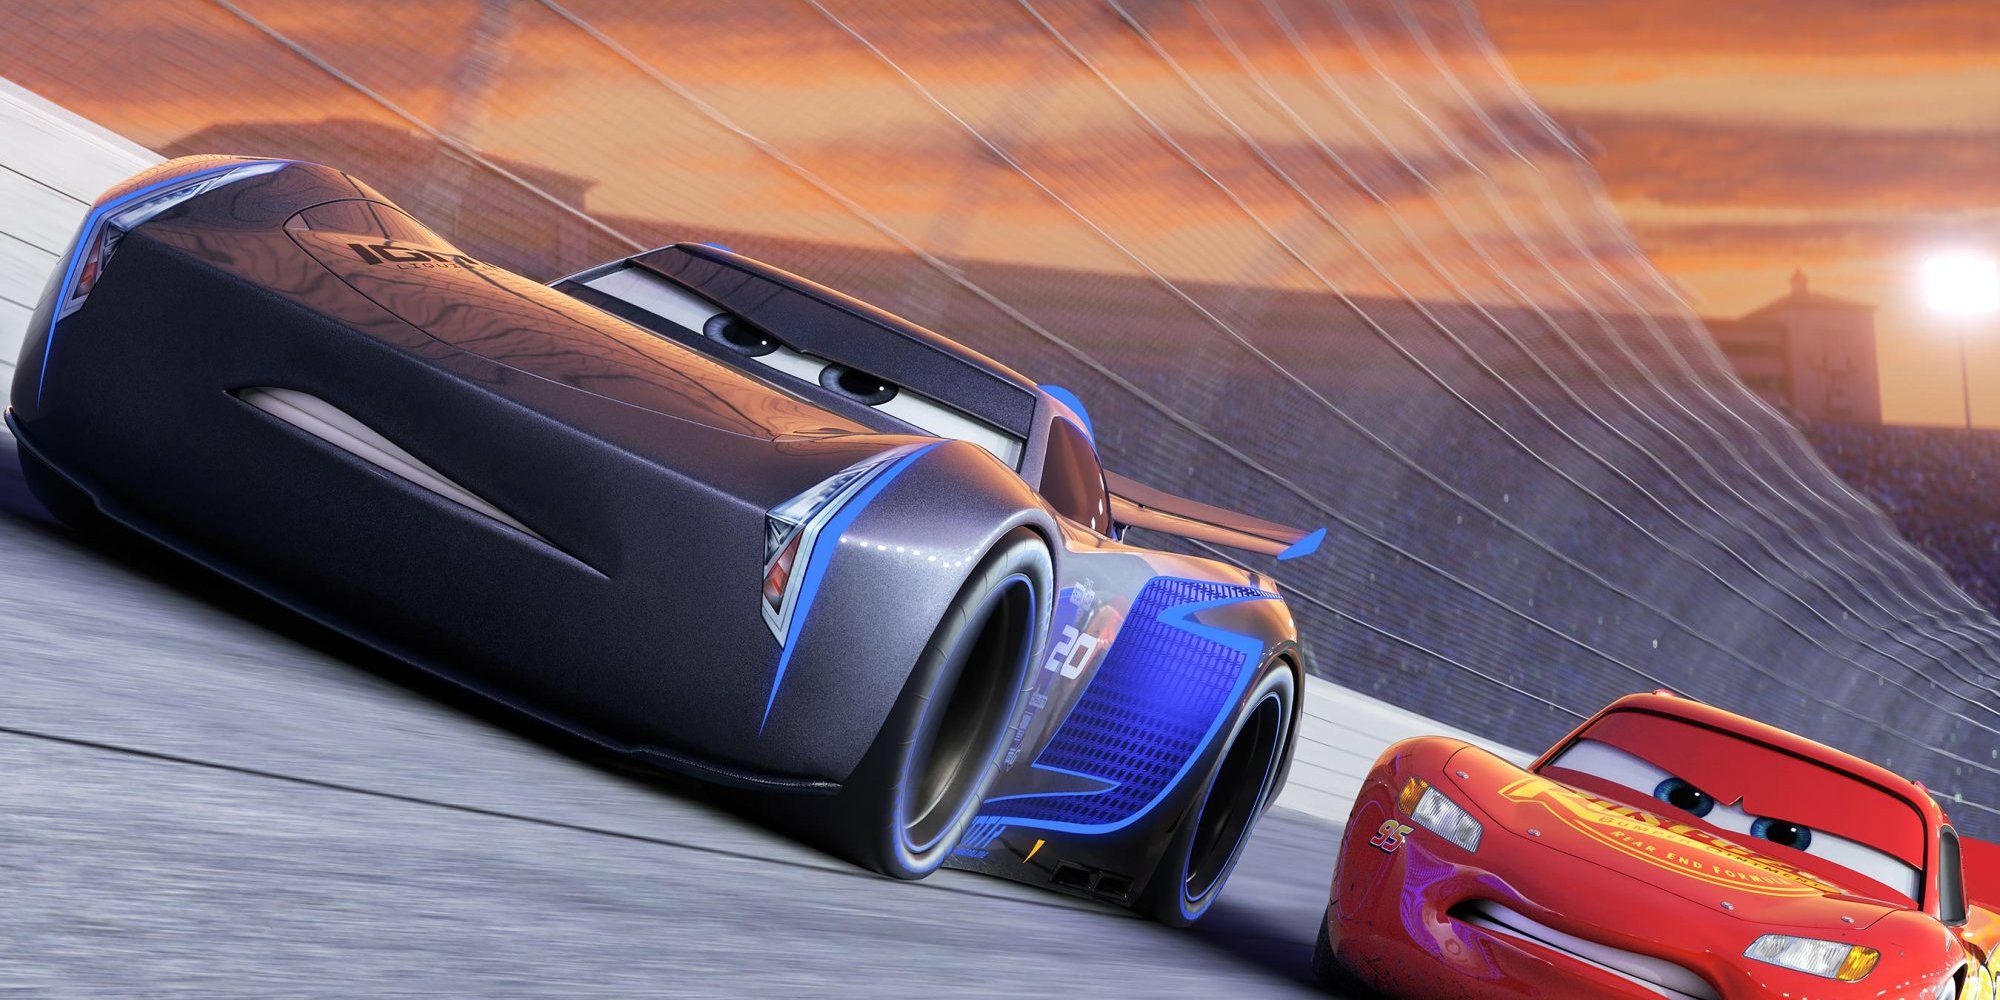 New Cars 3 Posters Tease Lightning McQueens Racing Rivalries